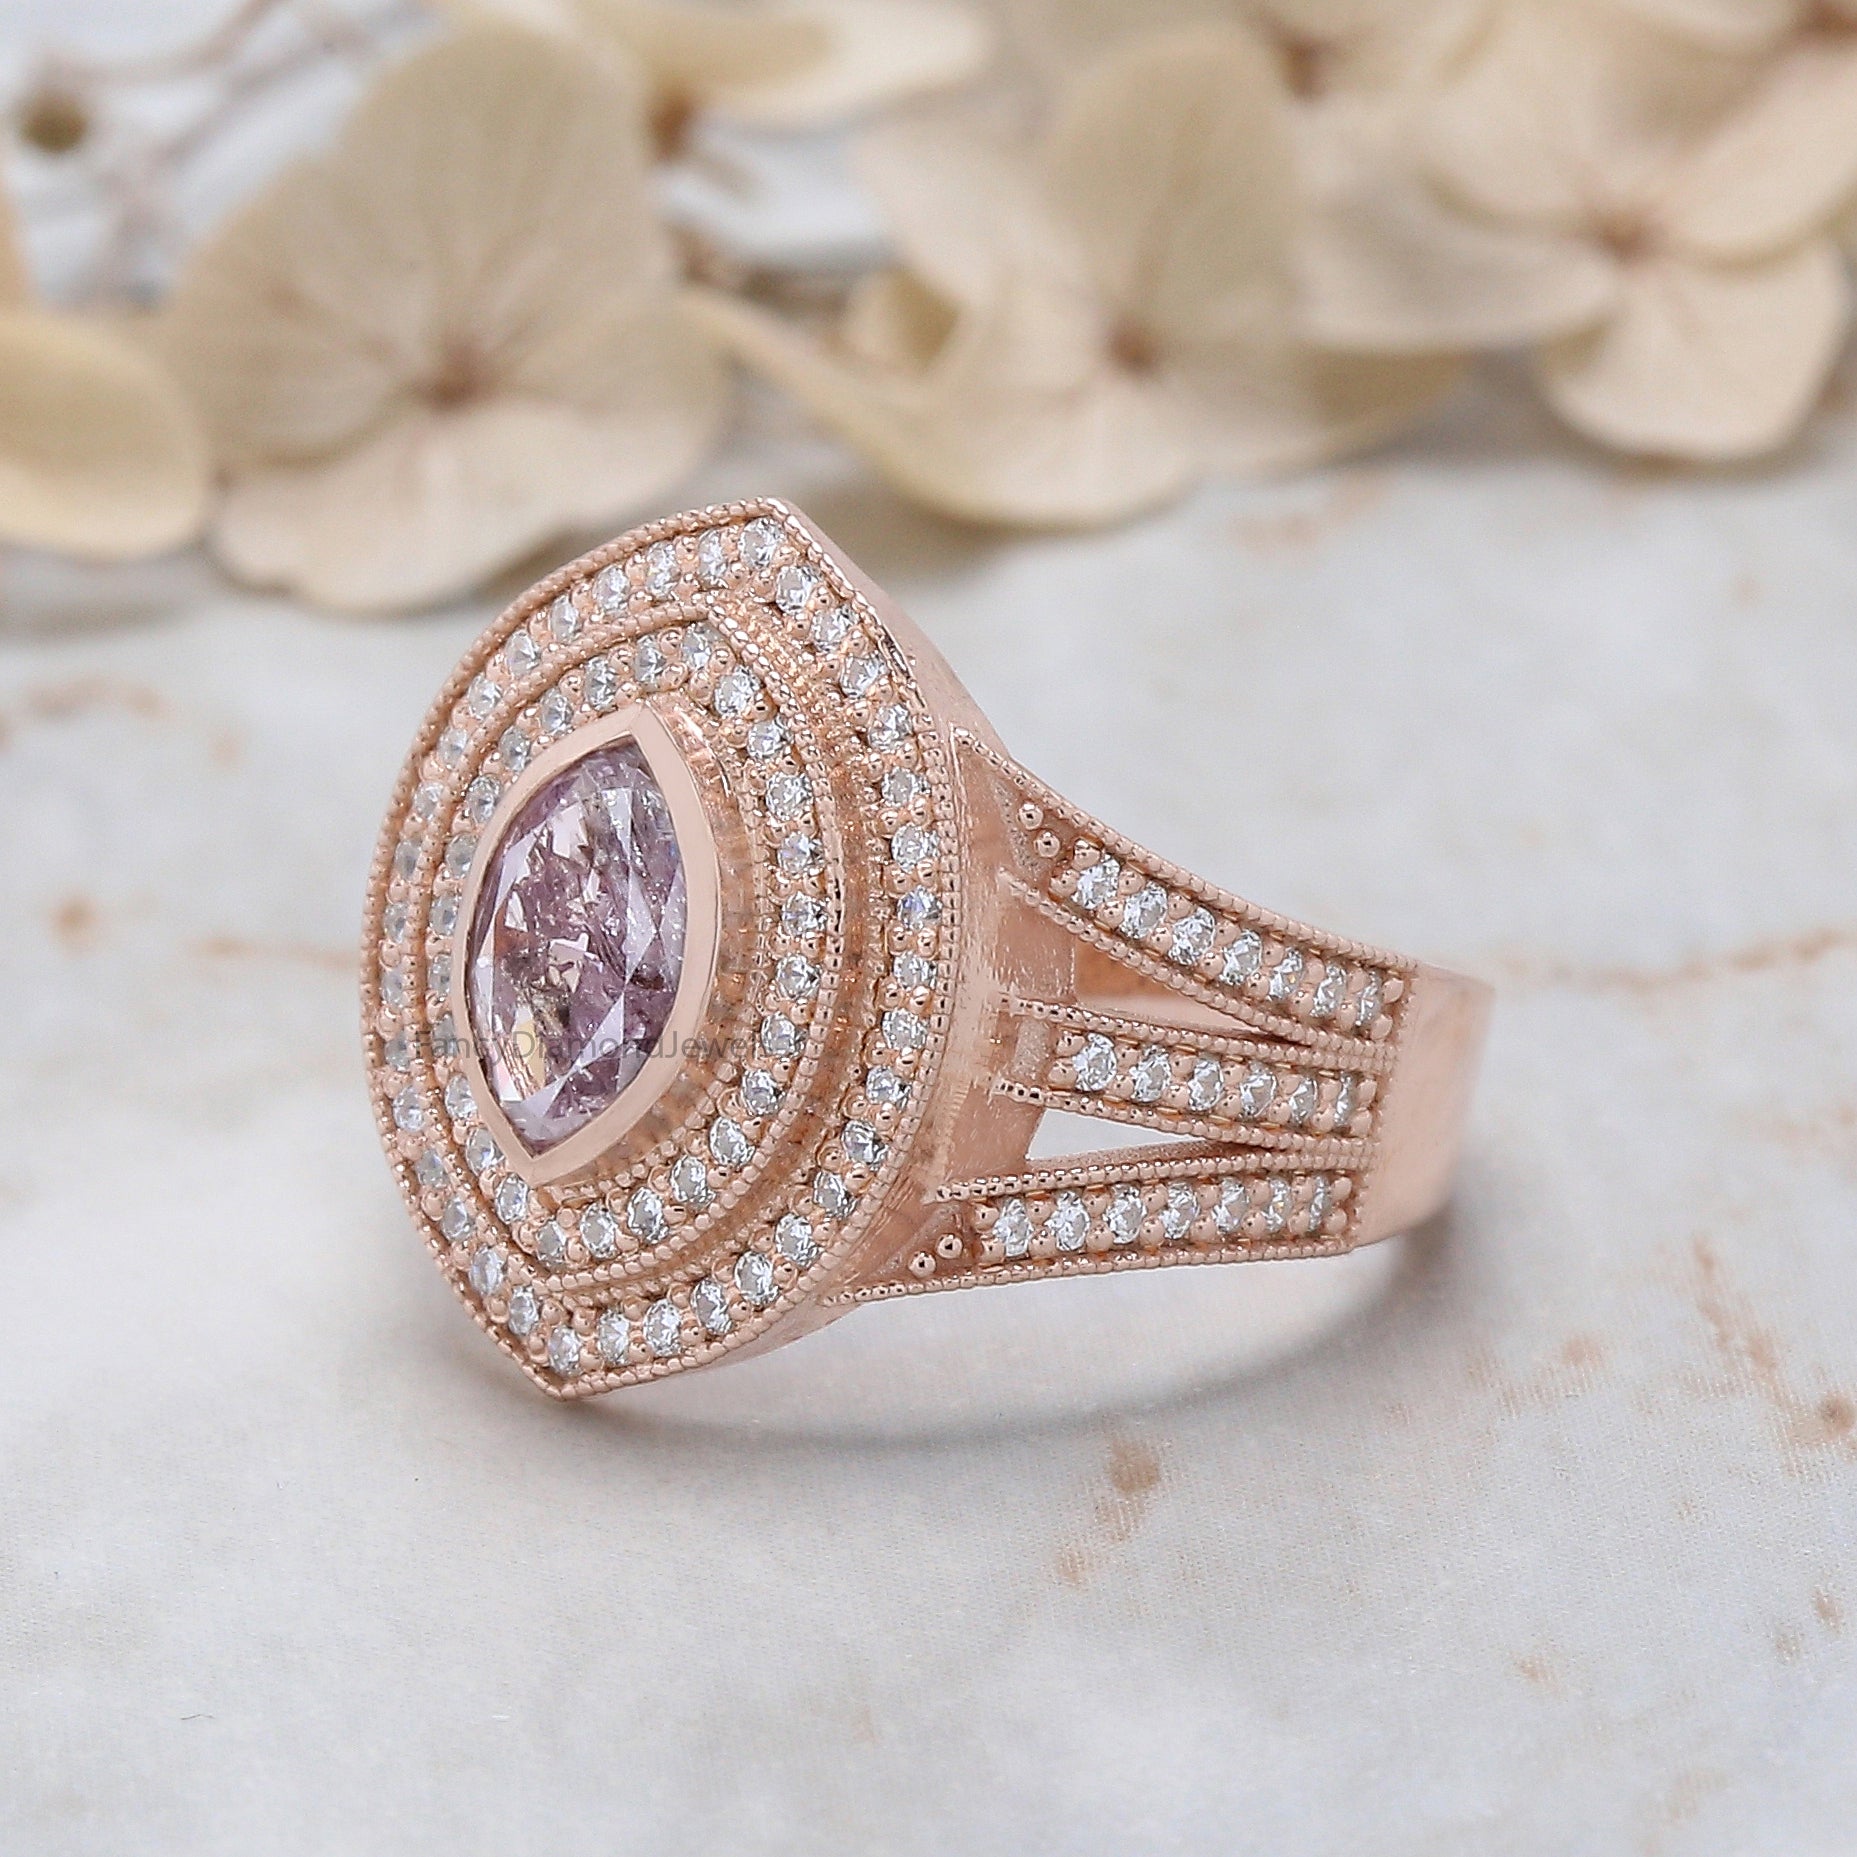 GIA Certified Marquise Pink Color Diamond Ring 0.53 Ct 7.43 MM Marquise Diamond Ring 14K Solid Rose Gold Engagement Ring Gift For Her QL6912